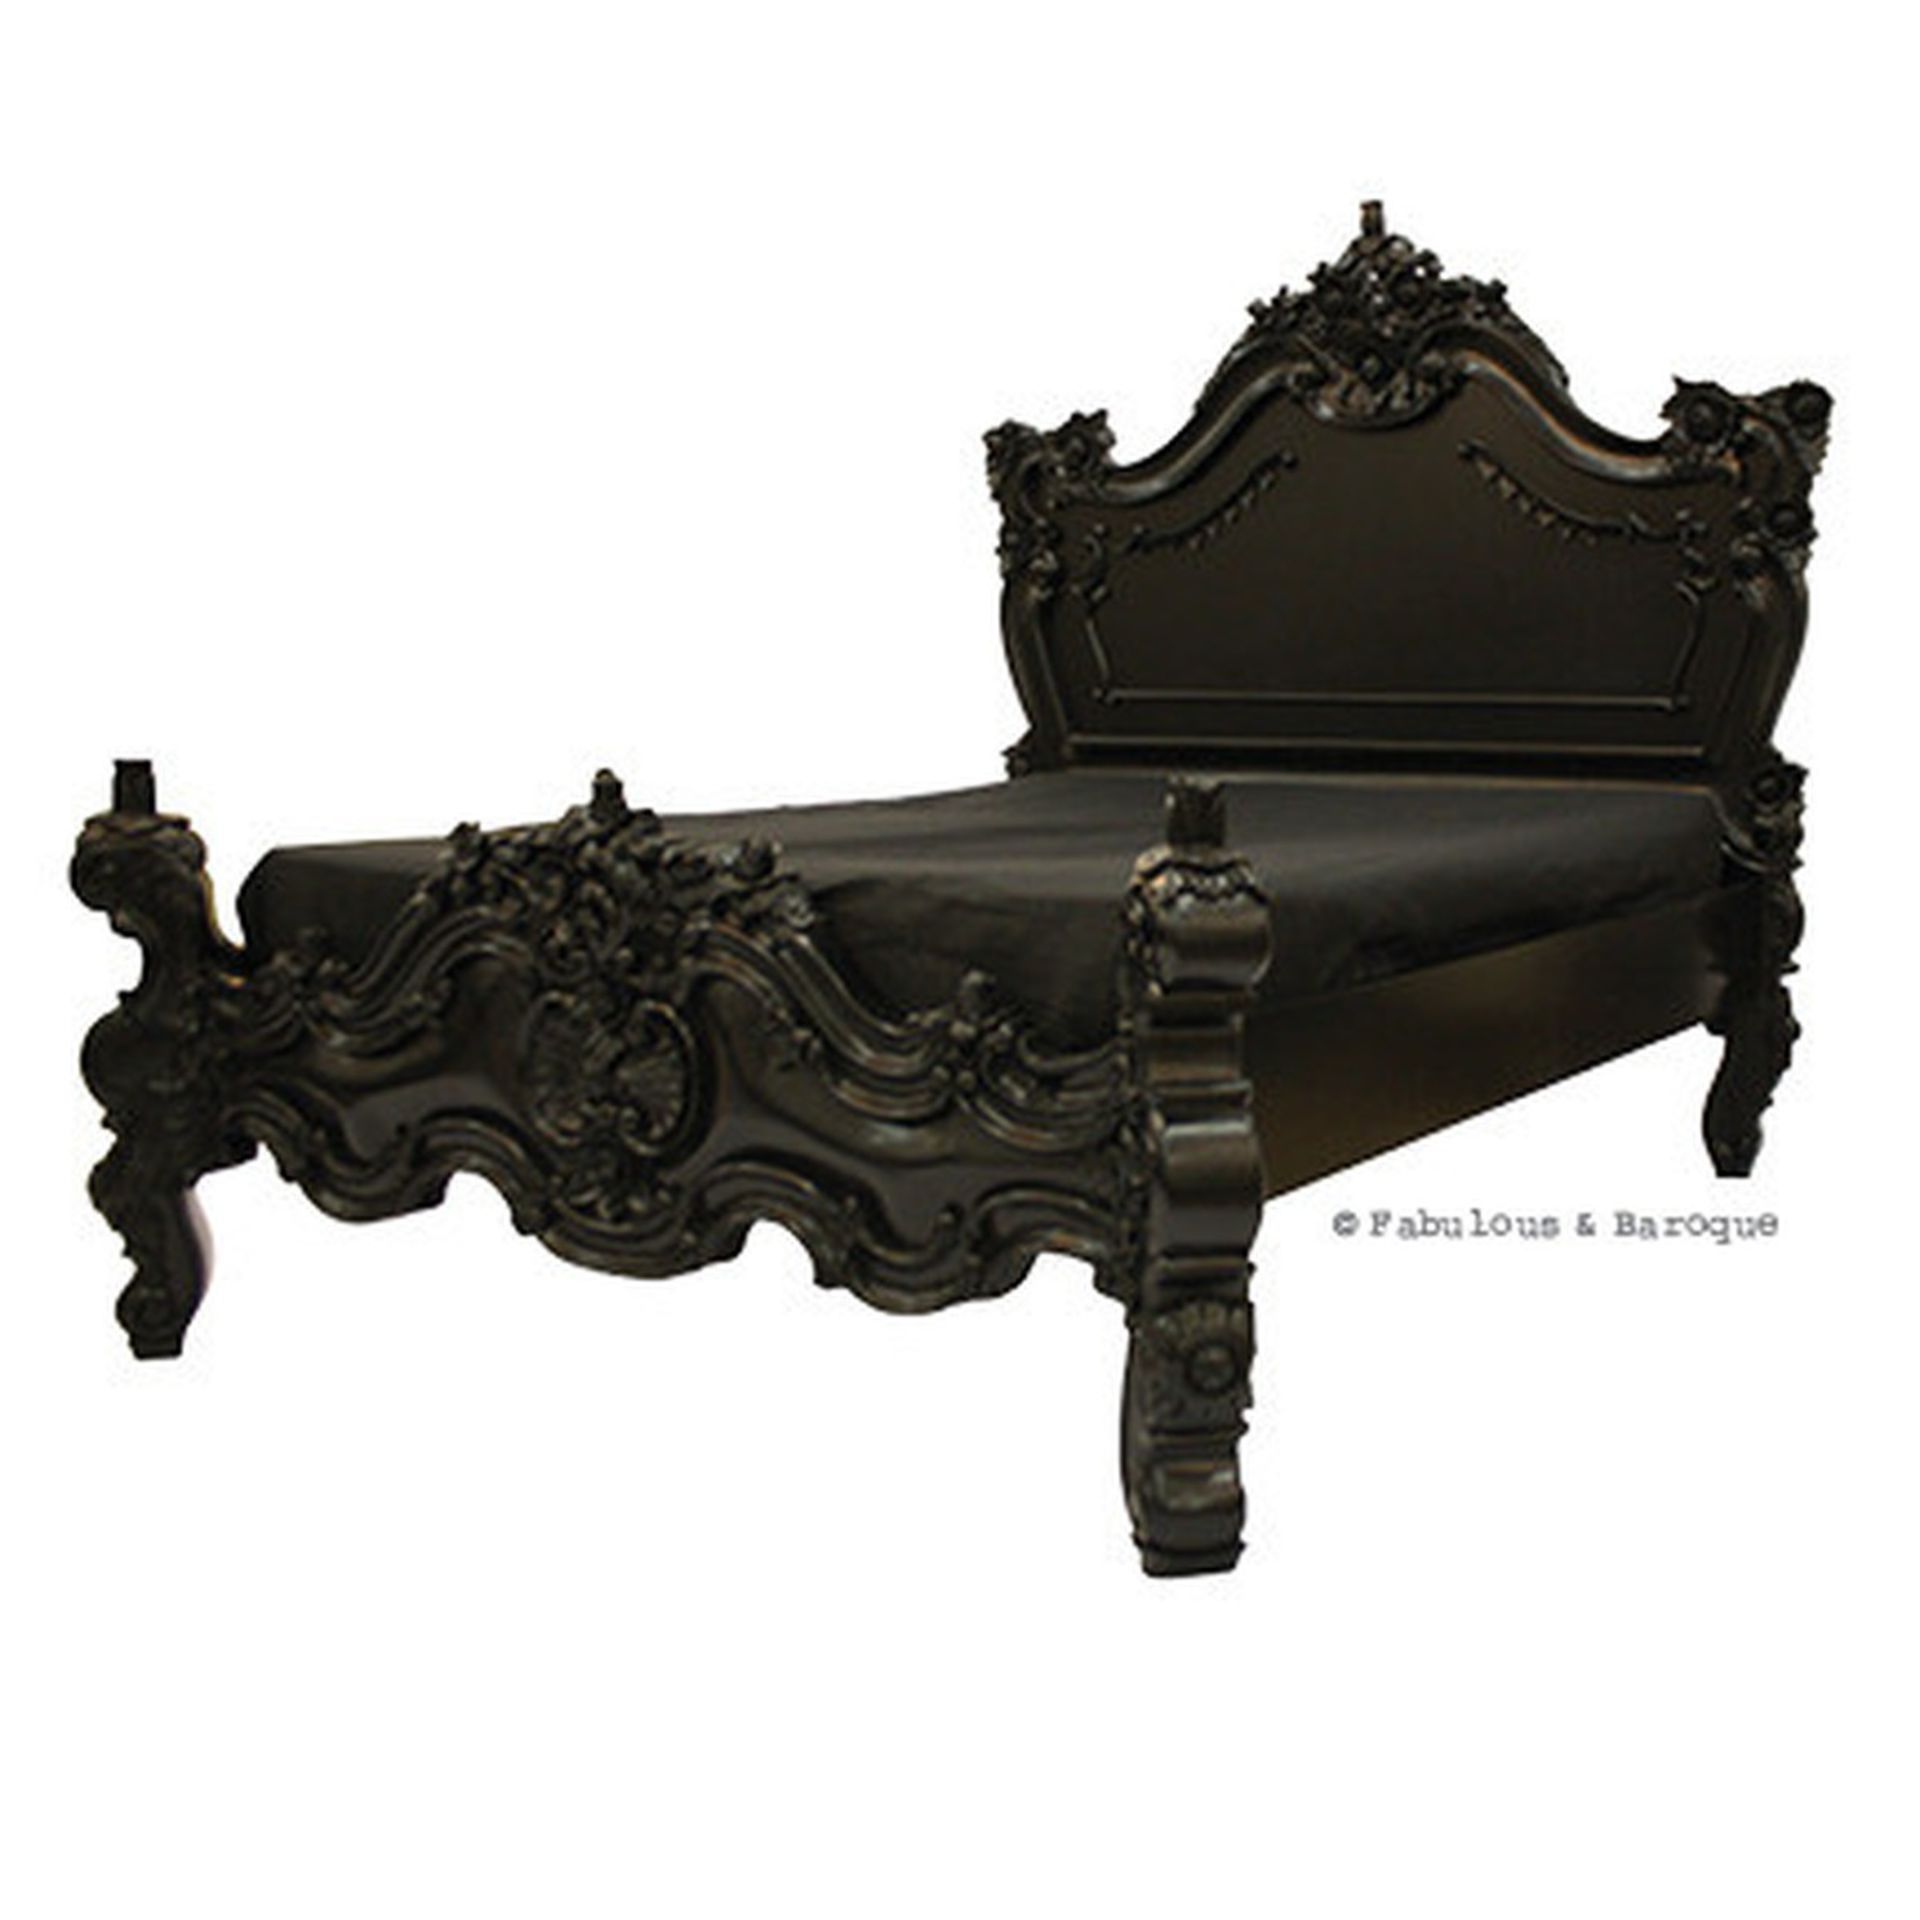 Brand new 5ft Baroque Bed In Black With its intricate and elaborate carvings, this luxurious